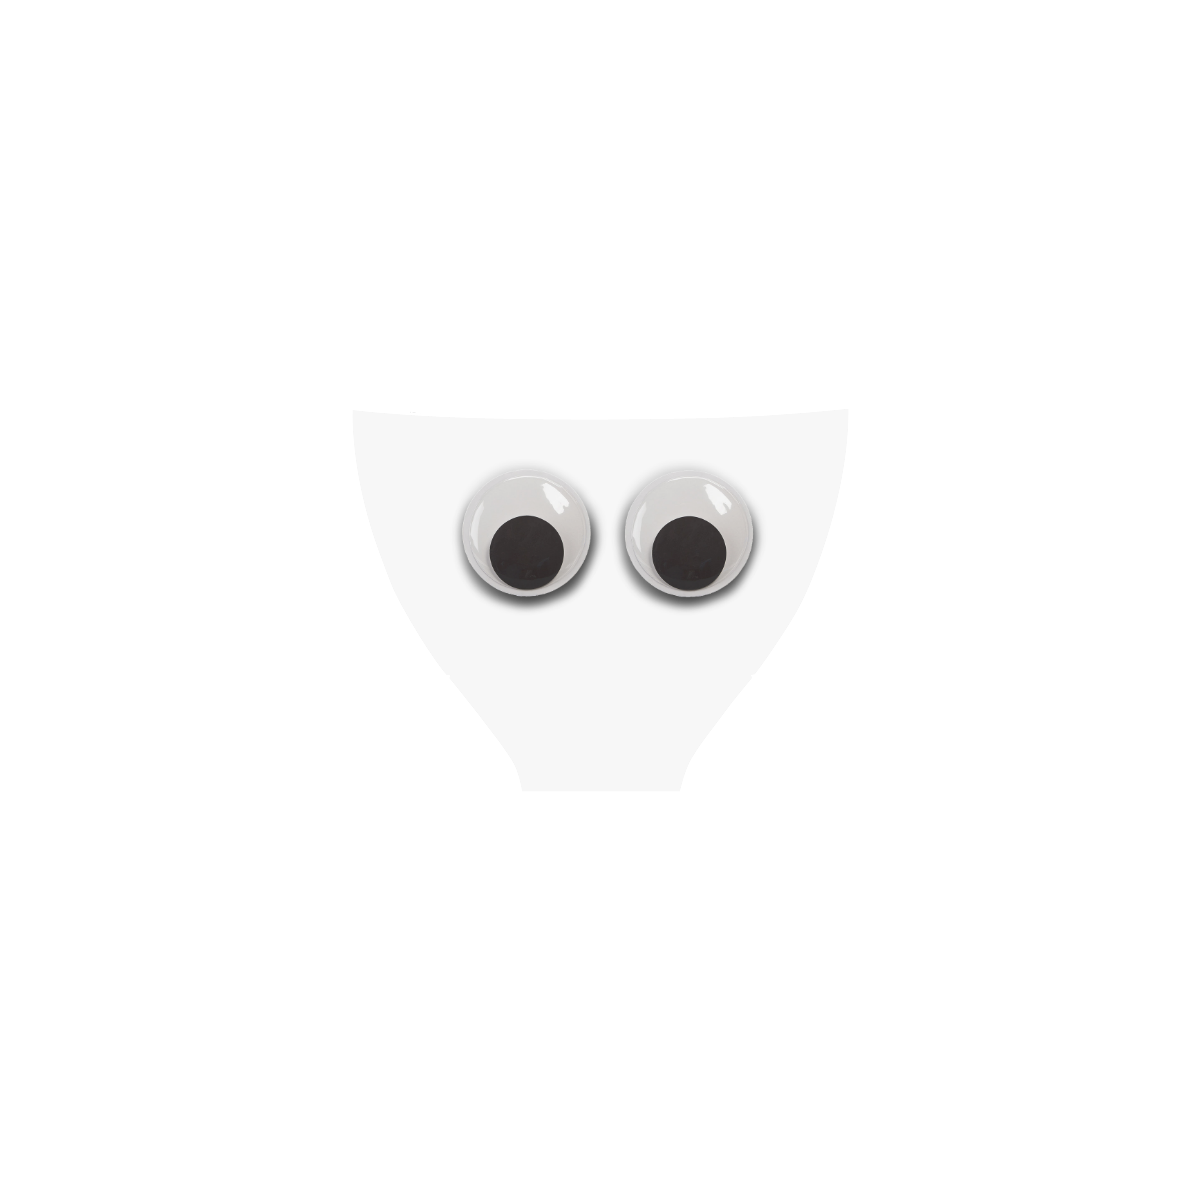 shauncrockett: a pair of large googly eyes on a white background looking  directly at the camera